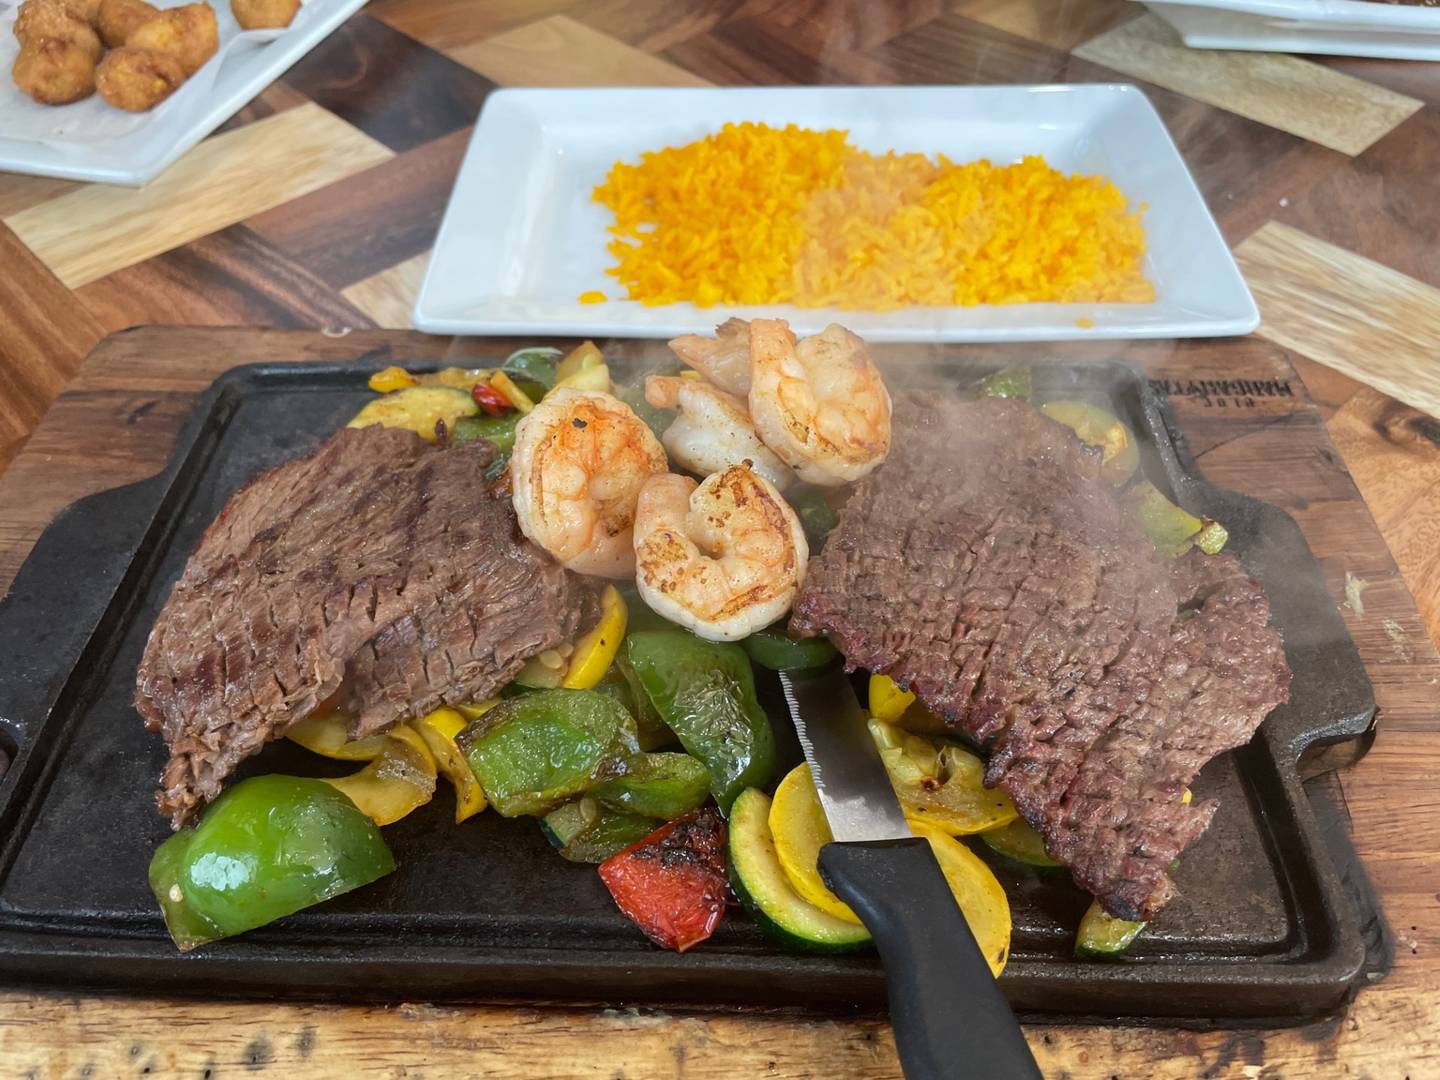 Steak mar y tierra is a Mexican surf-and-turf combo available at Blue Margaritas in Oglesby. Be warned: That skillet is HOT and should be kept at arm's length from the little ones.